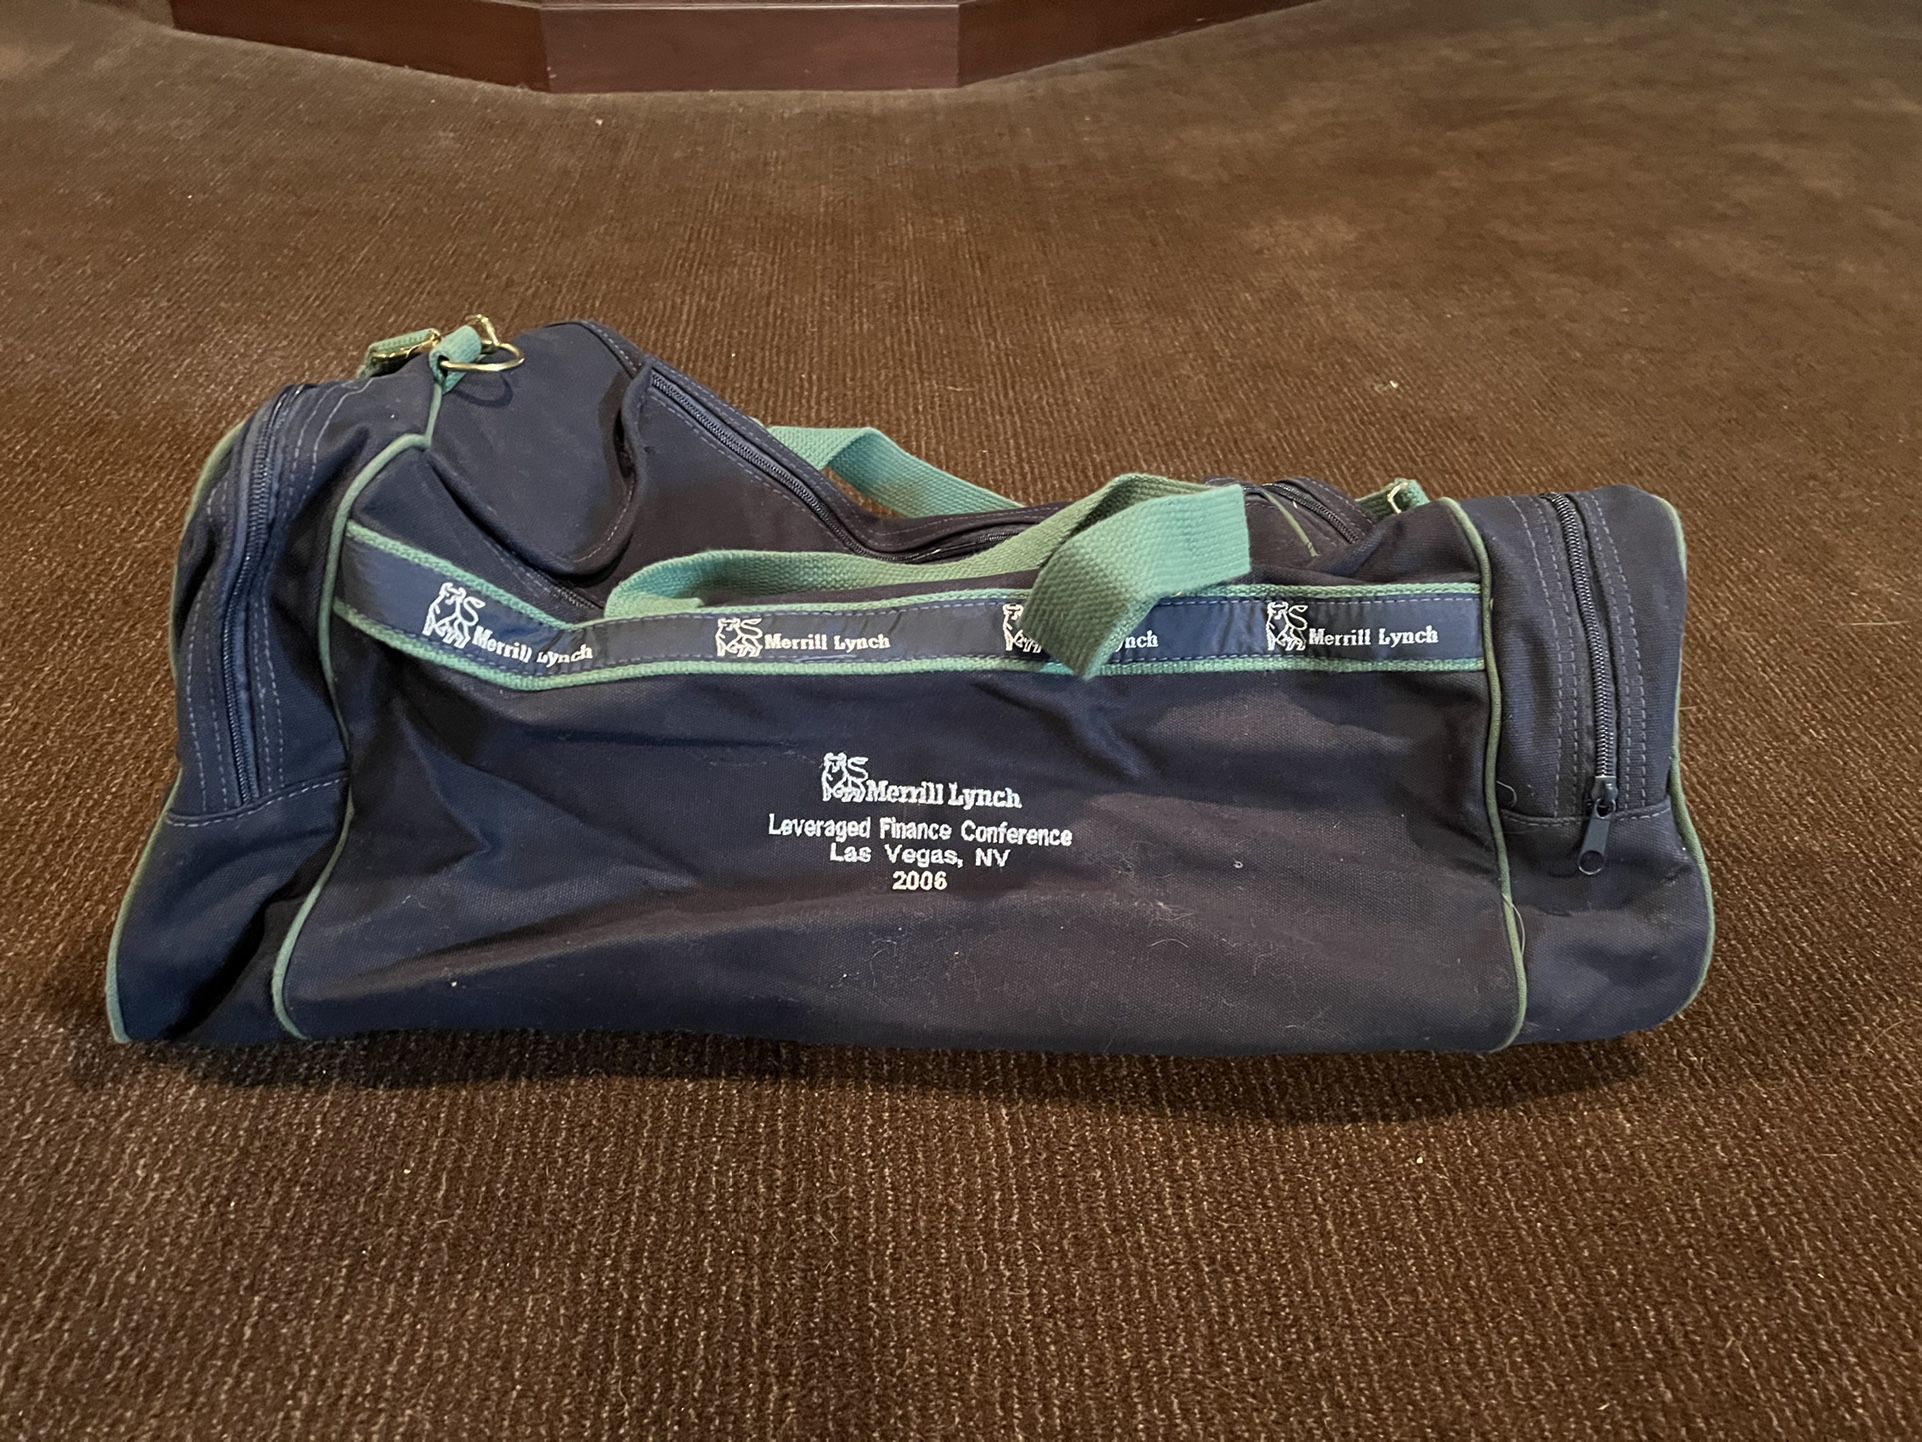 Merrill Lynch Leveraged Finance Conference Navy/Green Canvas Gym/Travel Bag